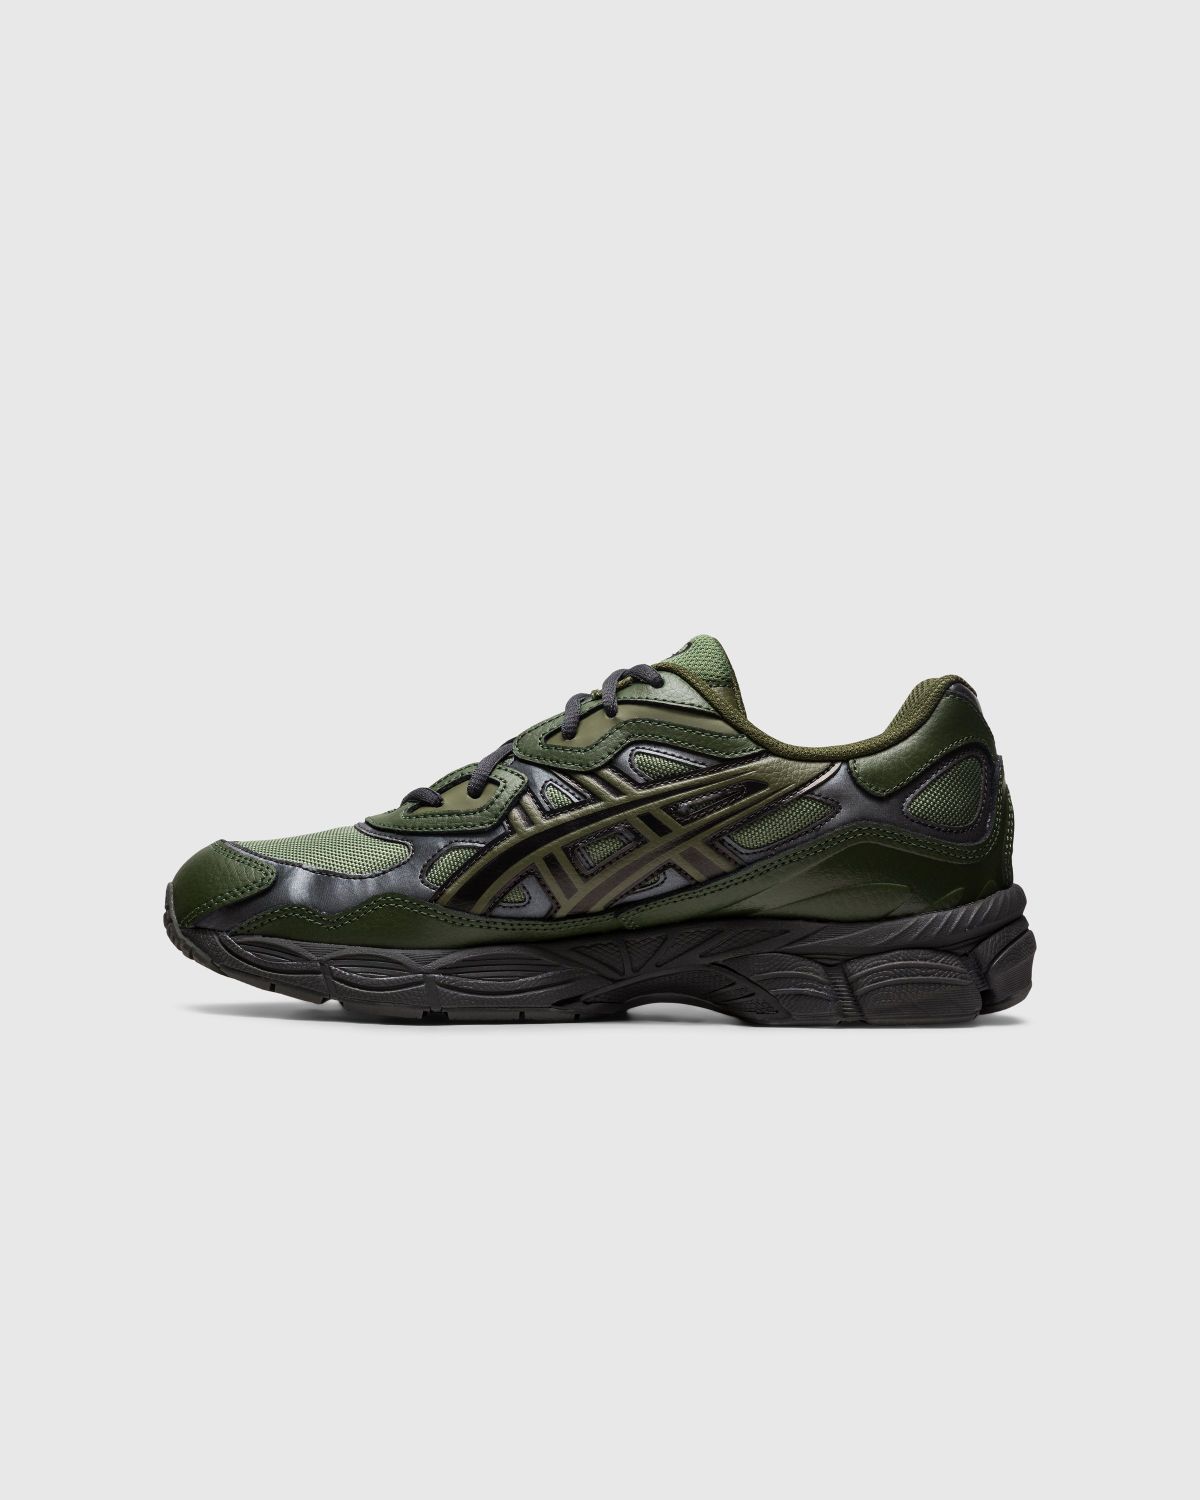 asics – GEL-NYC Moss/Forest - Sneakers - Green - Image 2